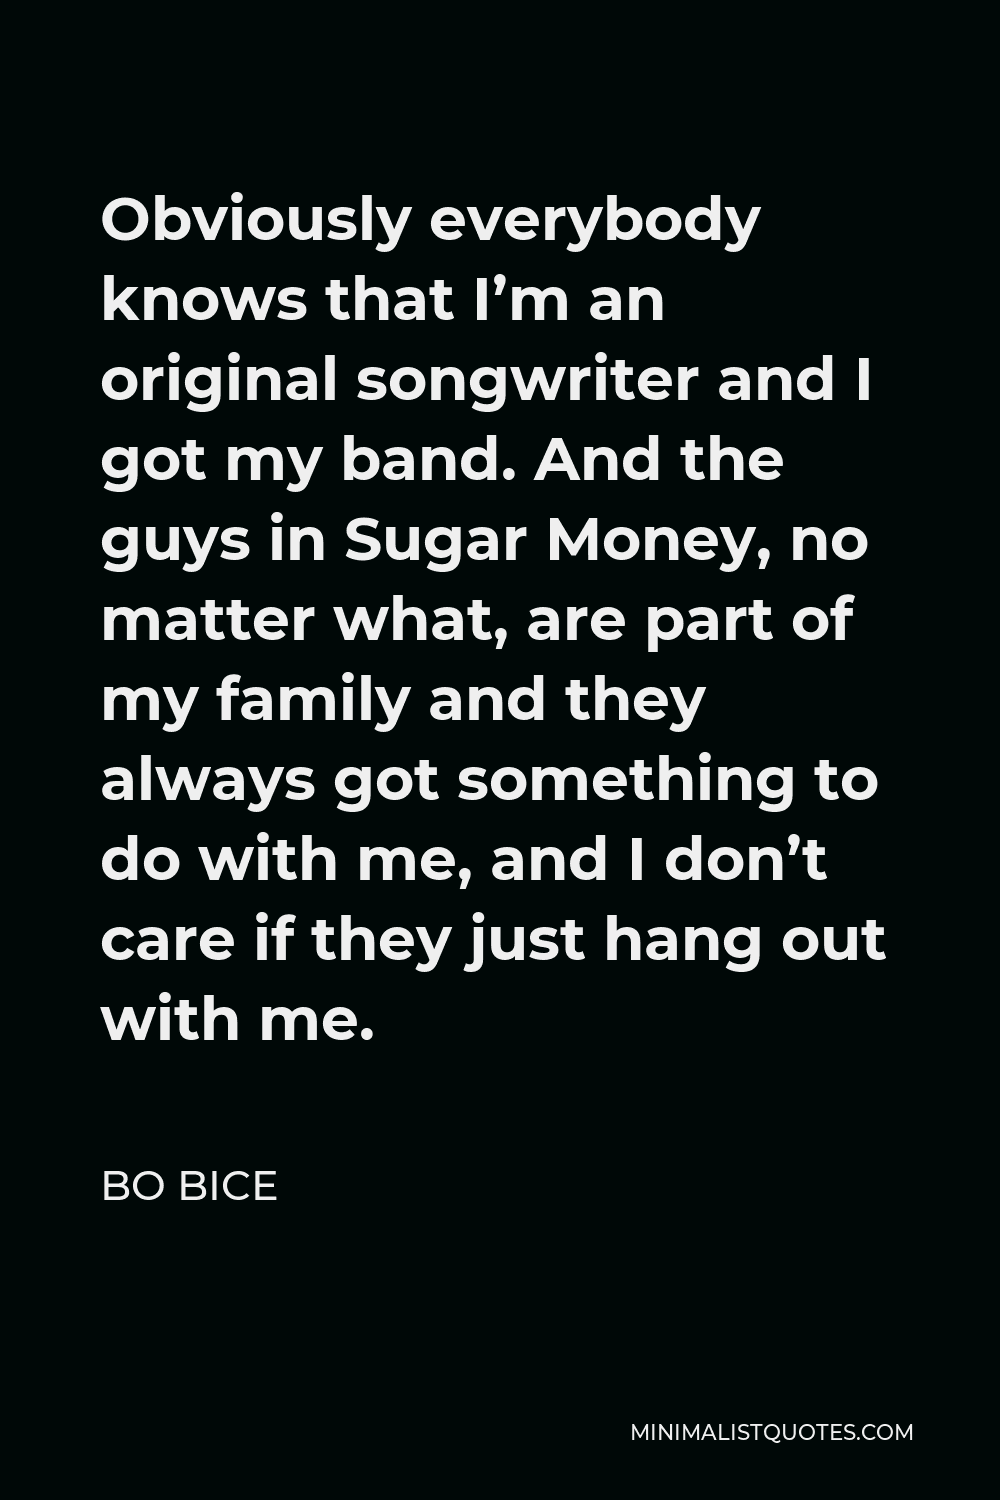 Bo Bice Quote - Obviously everybody knows that I’m an original songwriter and I got my band. And the guys in Sugar Money, no matter what, are part of my family and they always got something to do with me, and I don’t care if they just hang out with me.